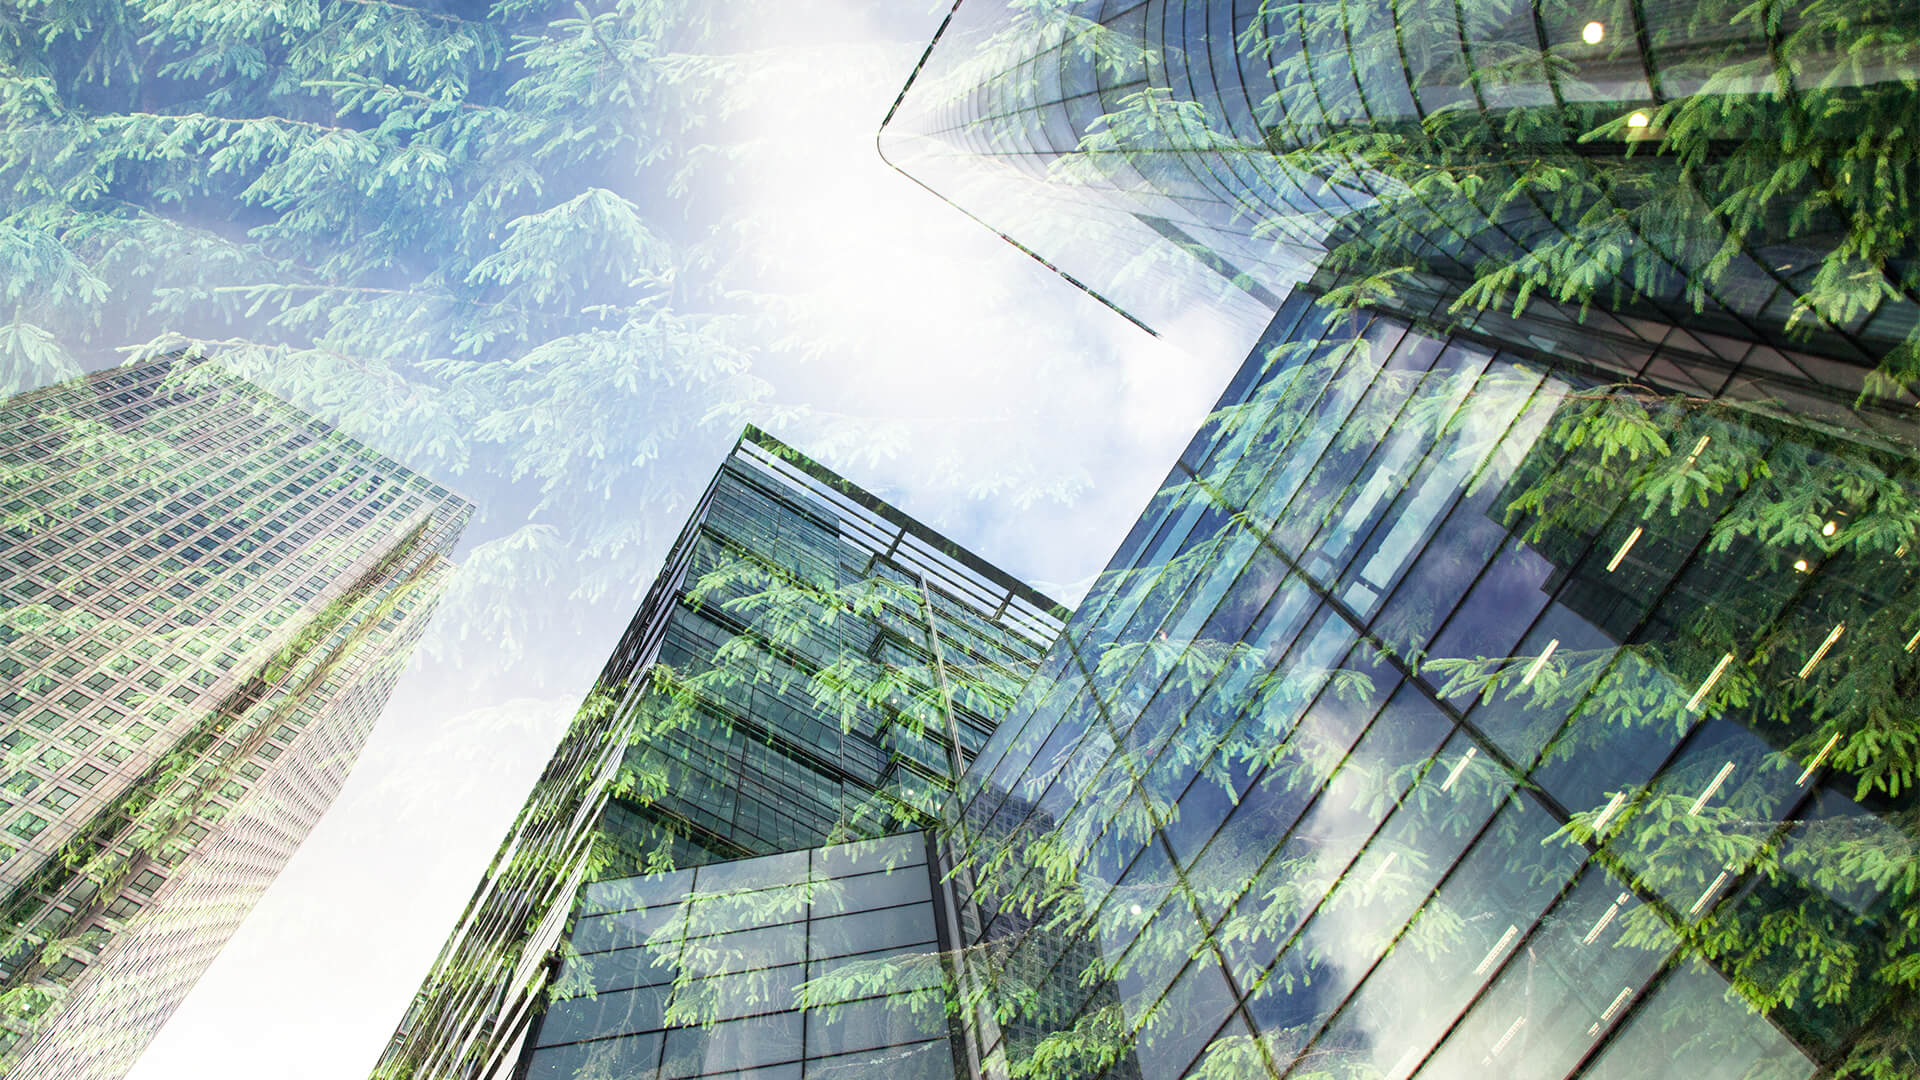 Double exposure of a skyscraper with green leafy trees